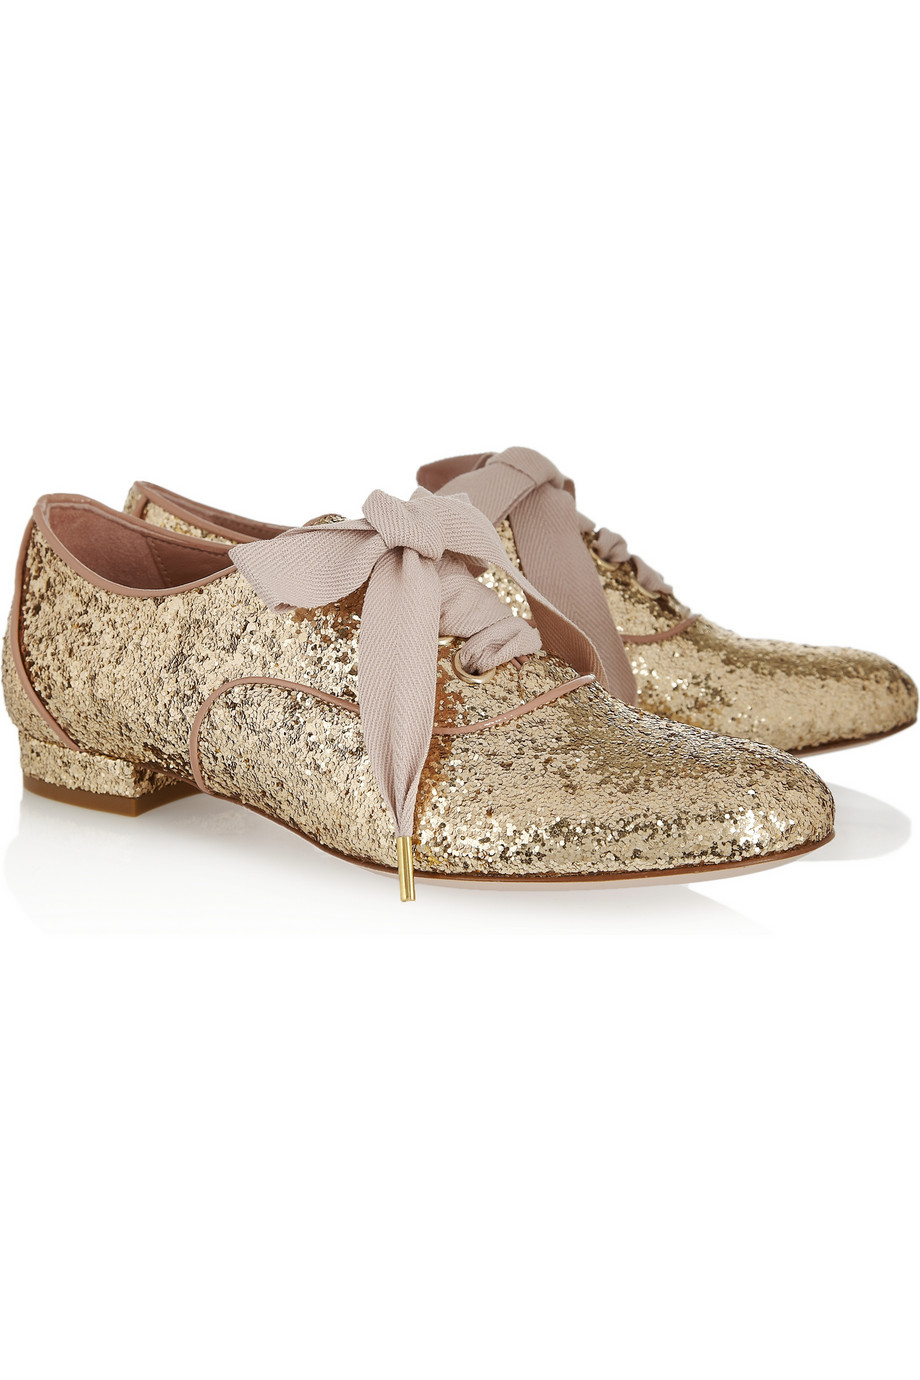 rose gold tap shoes